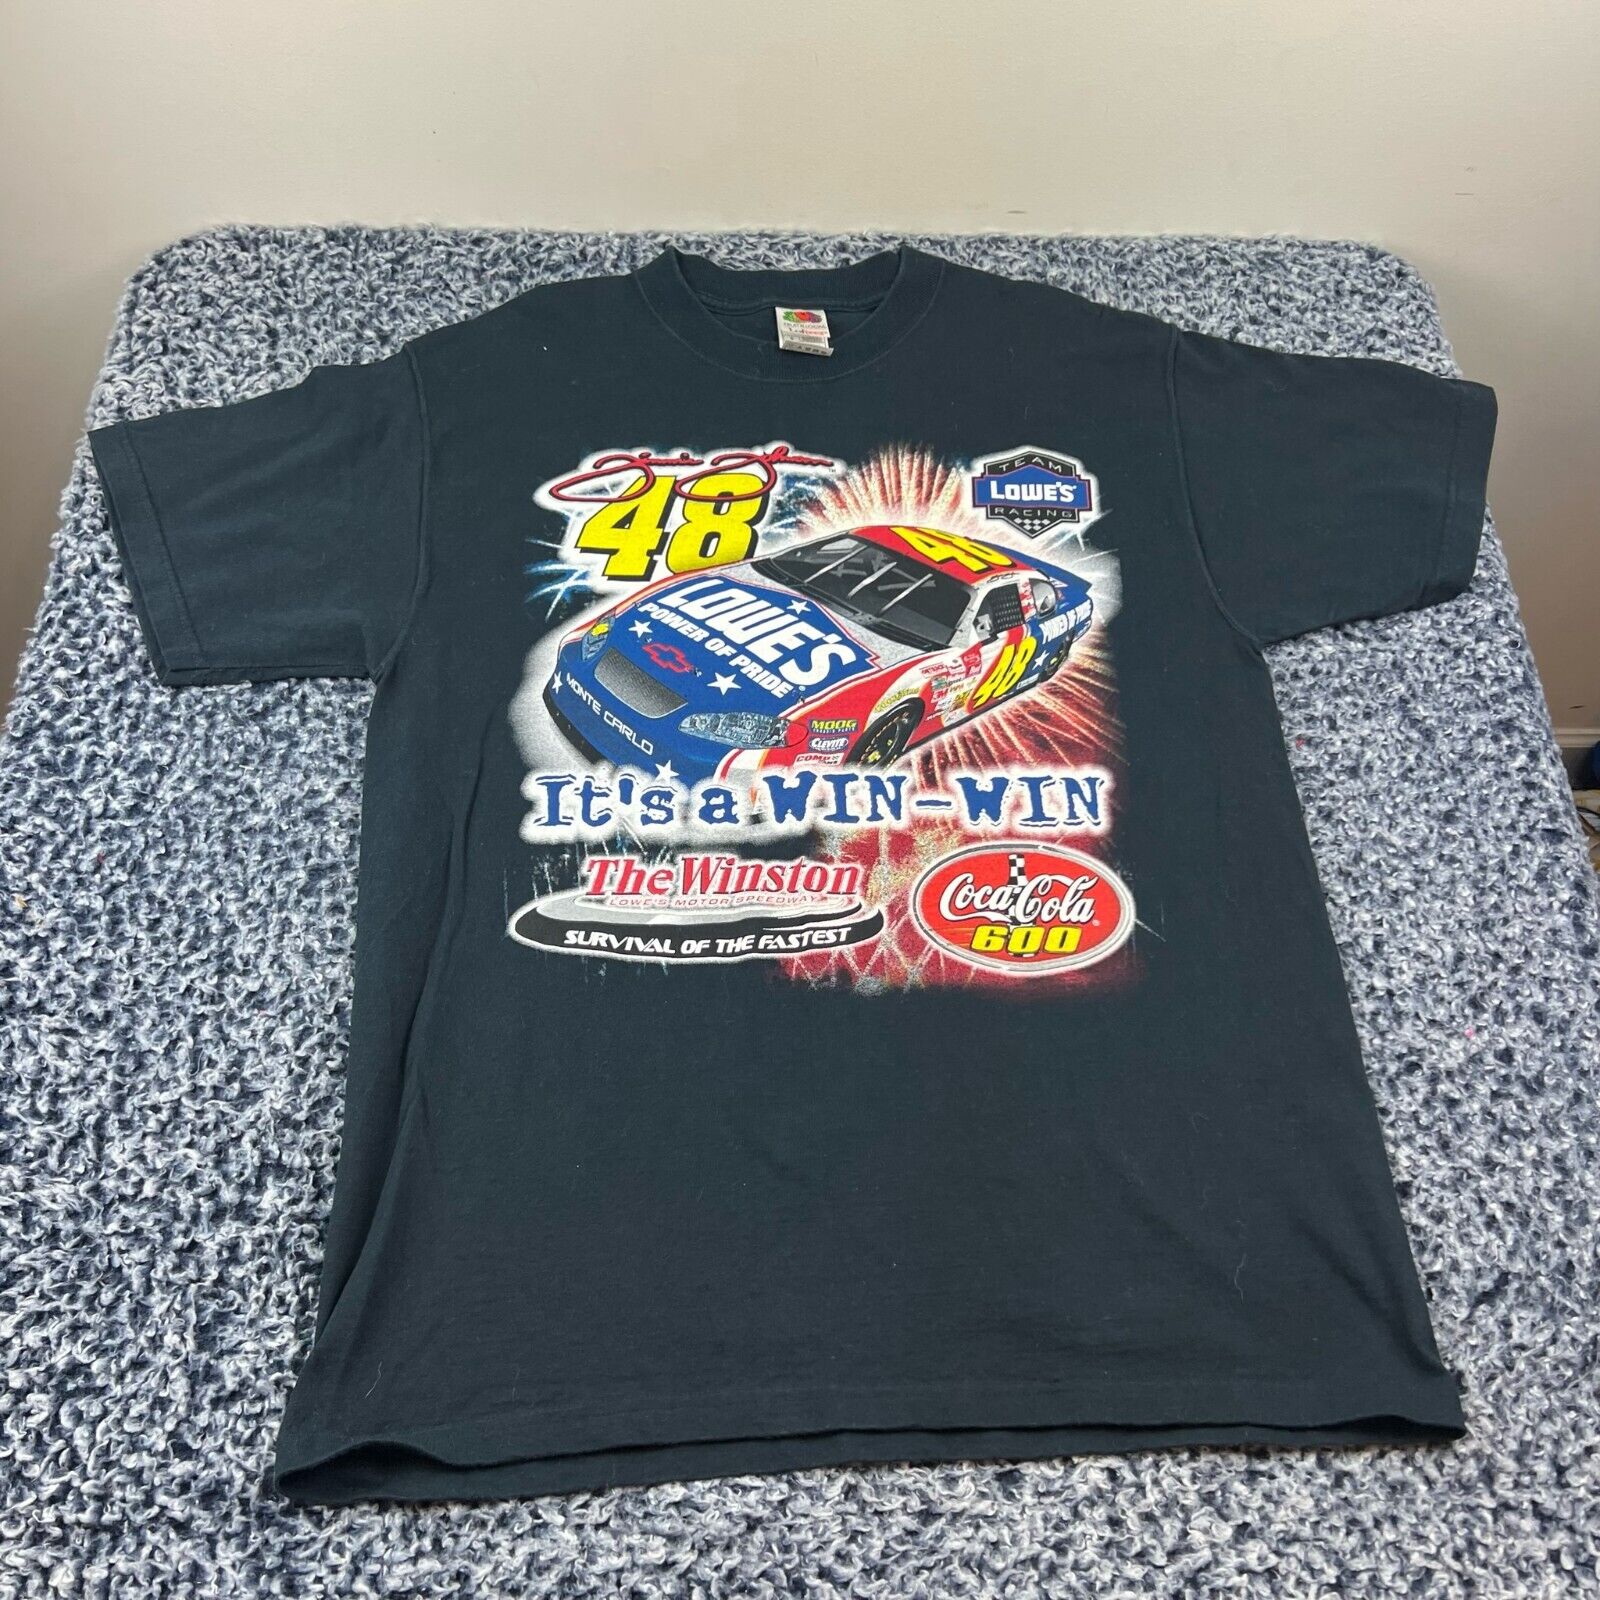 NASCAR Jimmie Johnson Coca Cola 600 Winner Shirt Adult Large Double Sided Racing